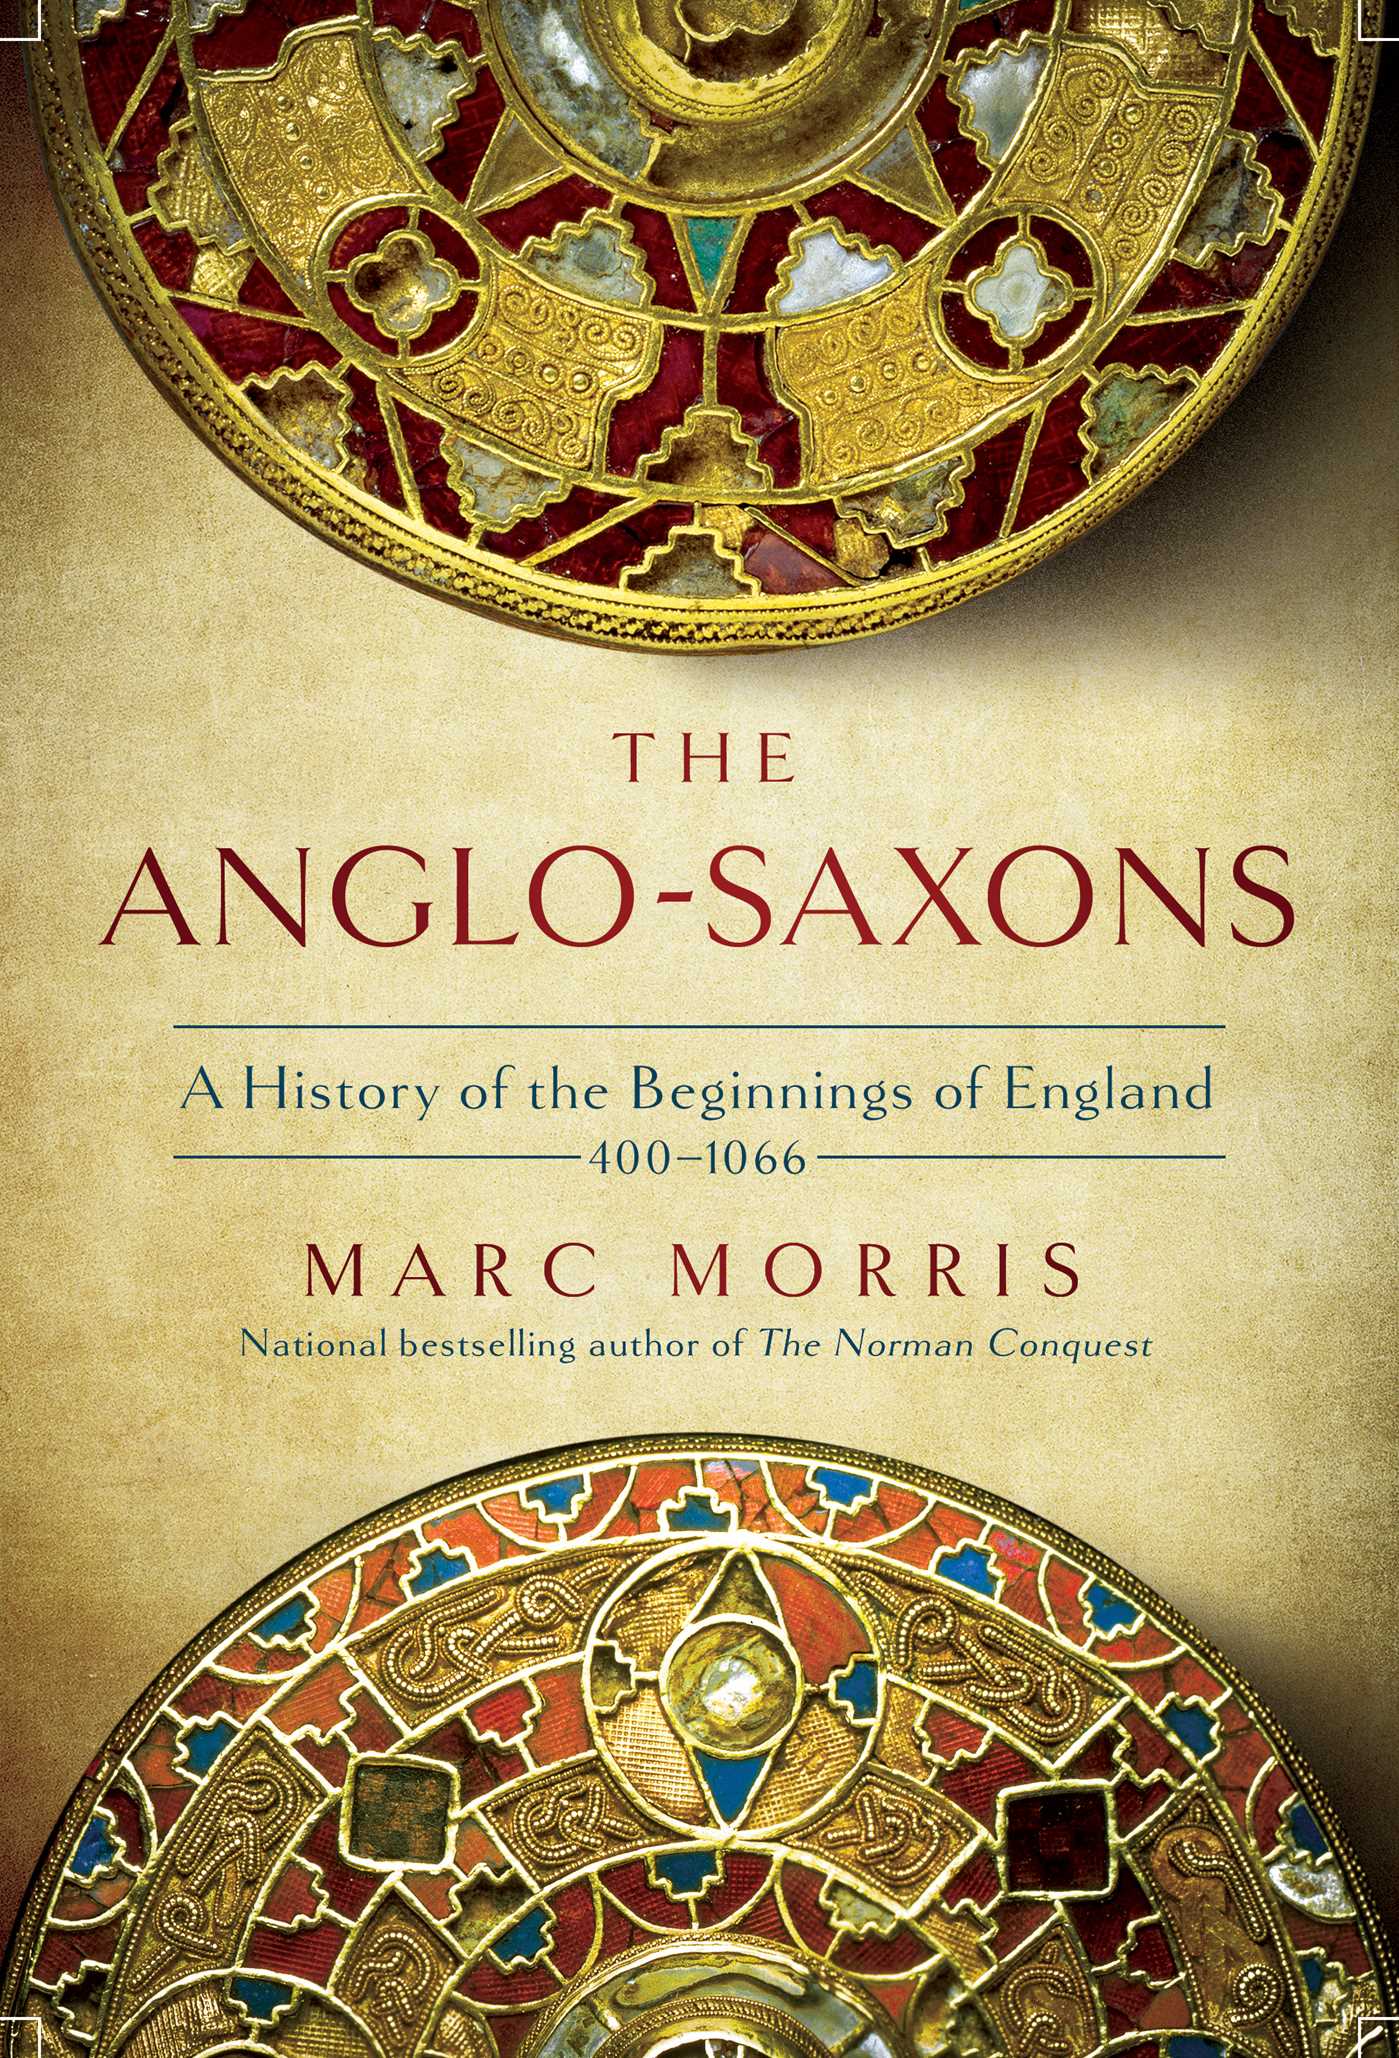 The Anglo-Saxons : A History of the Beginnings of England: 400 – 1066 | Morris, Marc